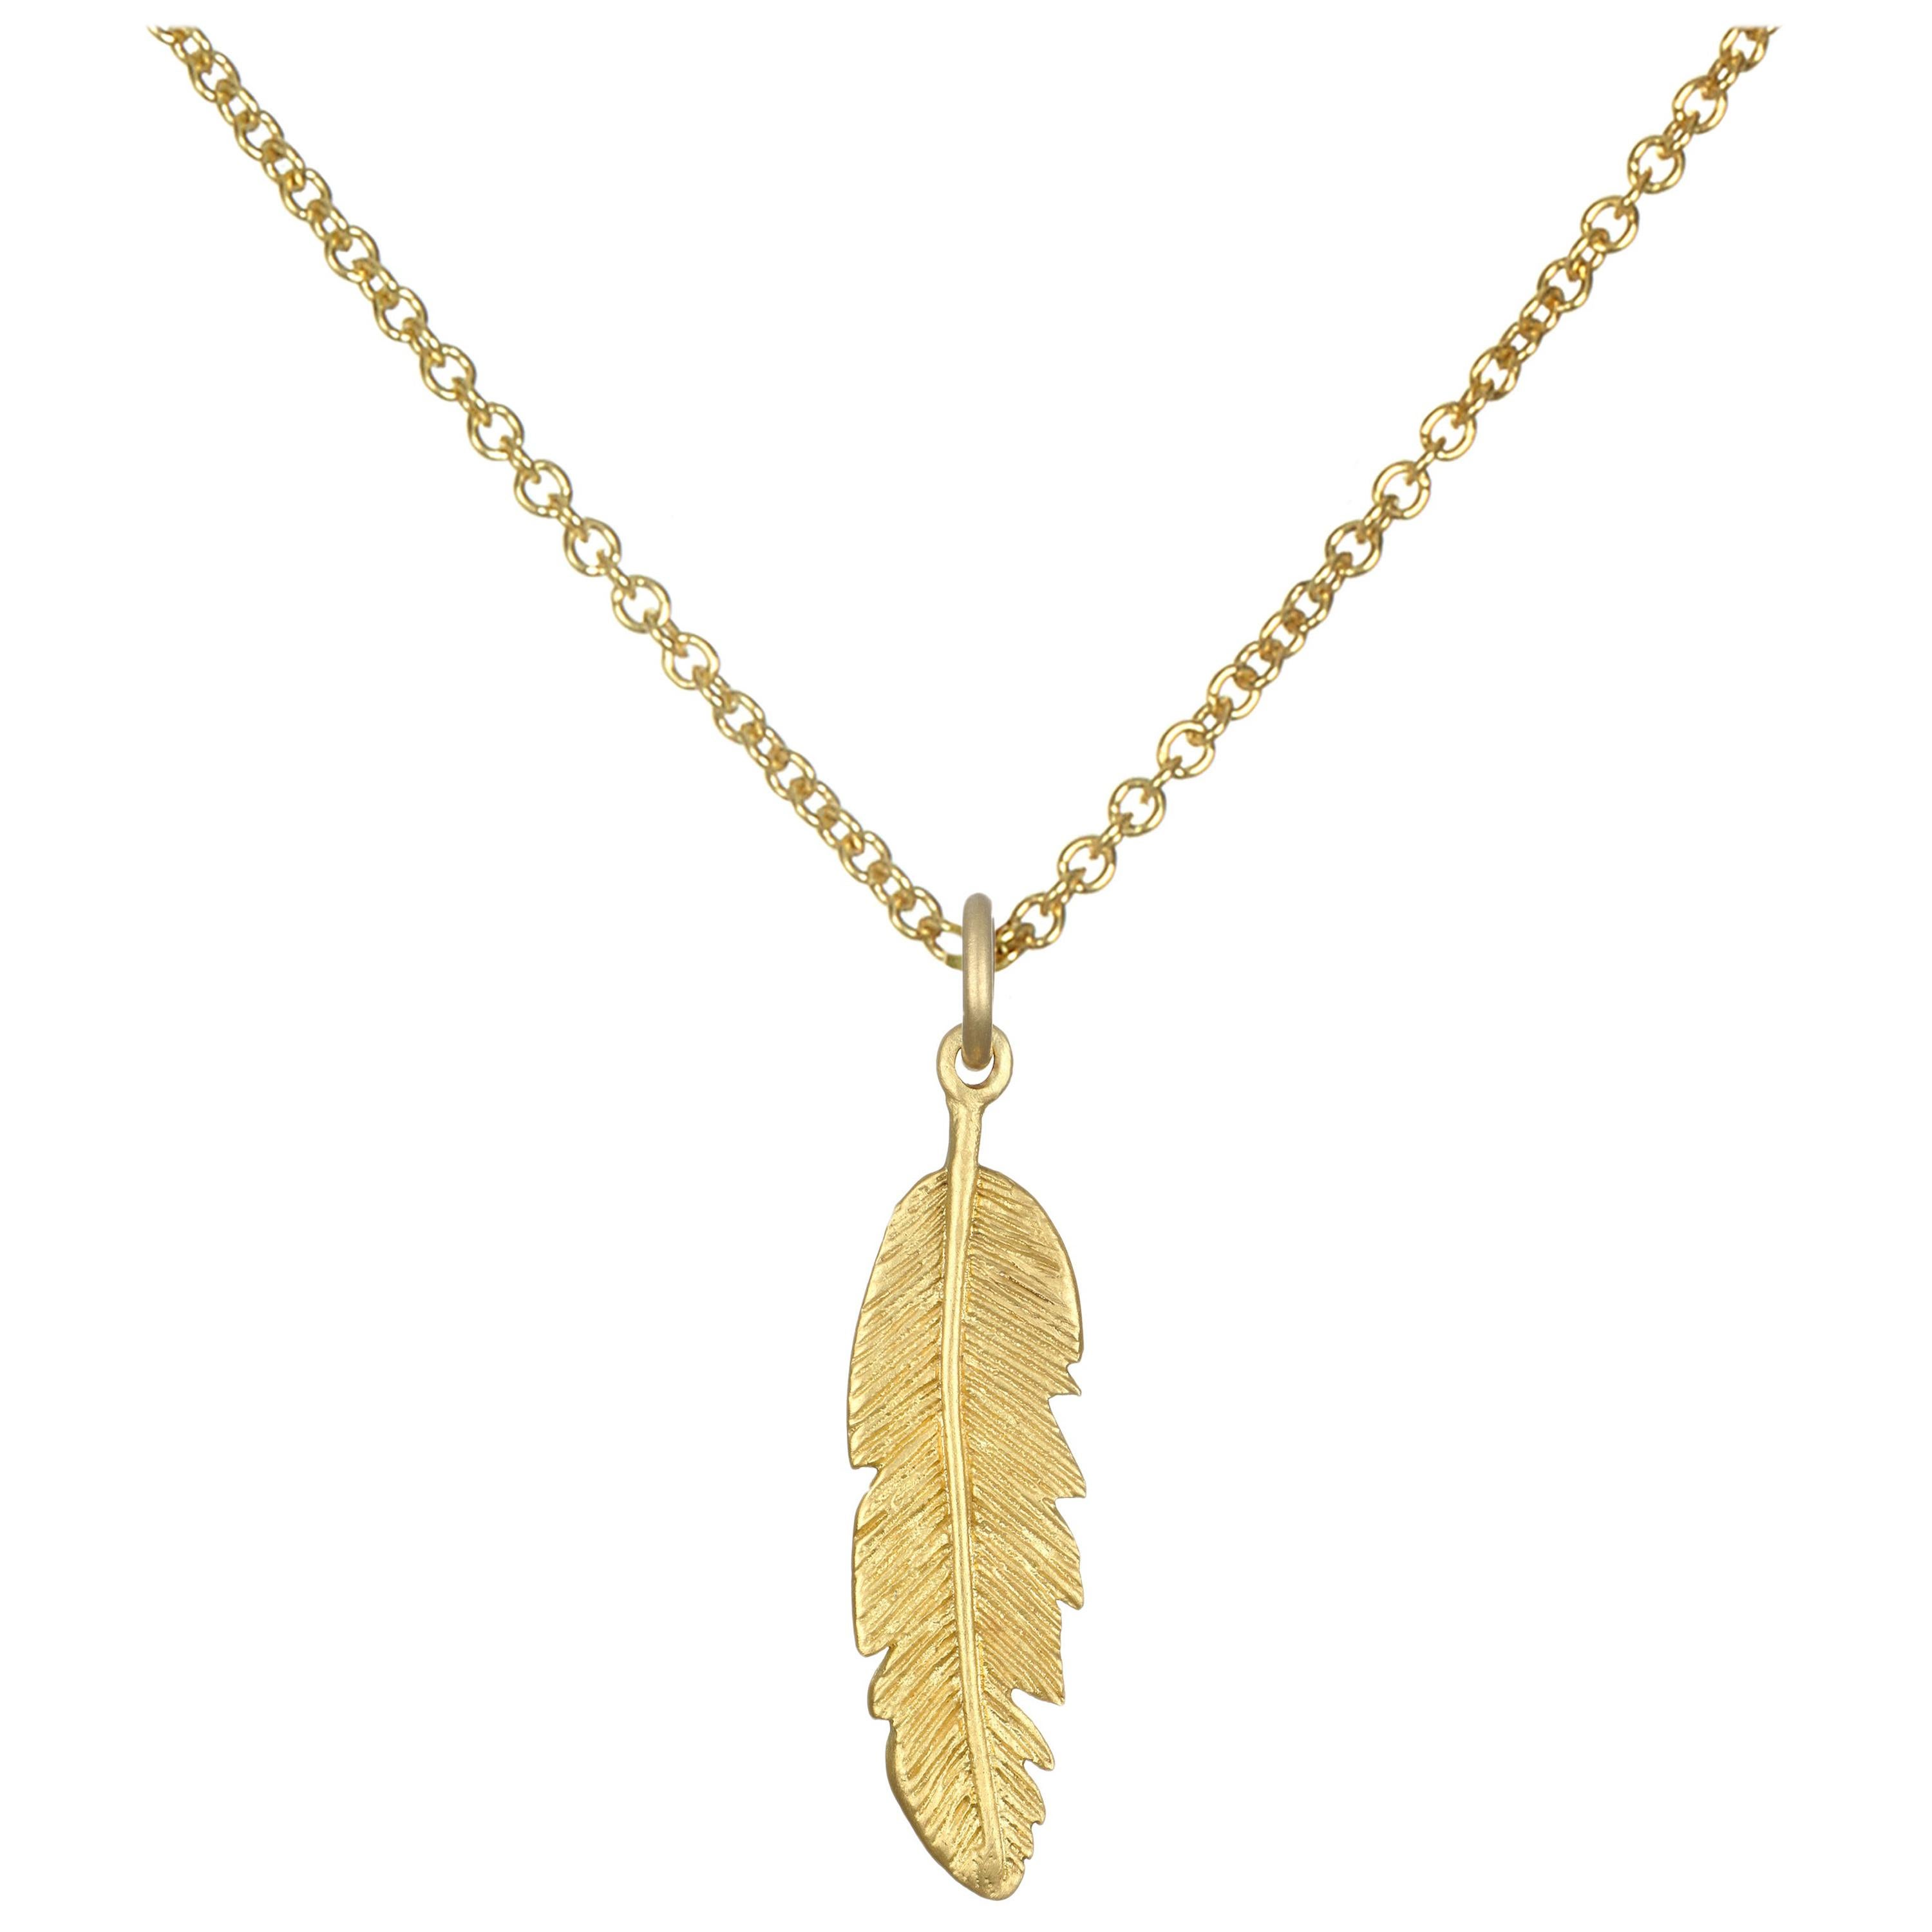 Faye Kim 18k Gold Feather Charm Necklace